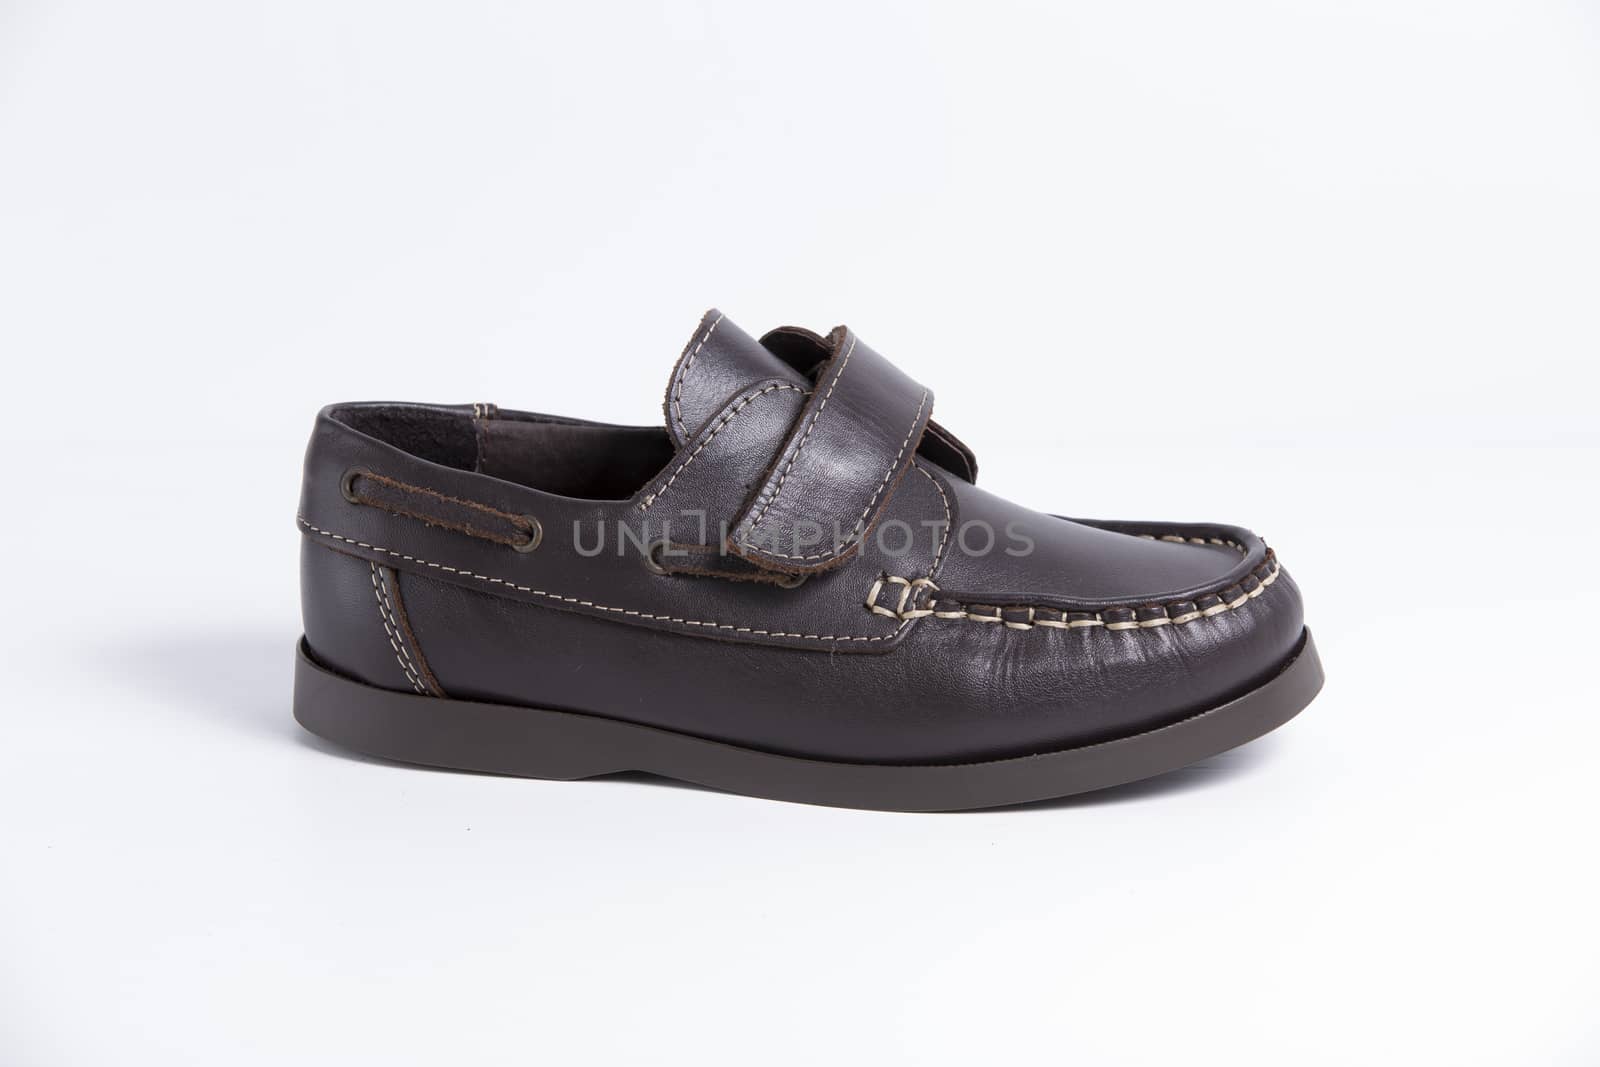 Male brown leather shoe on white background, isolated product.